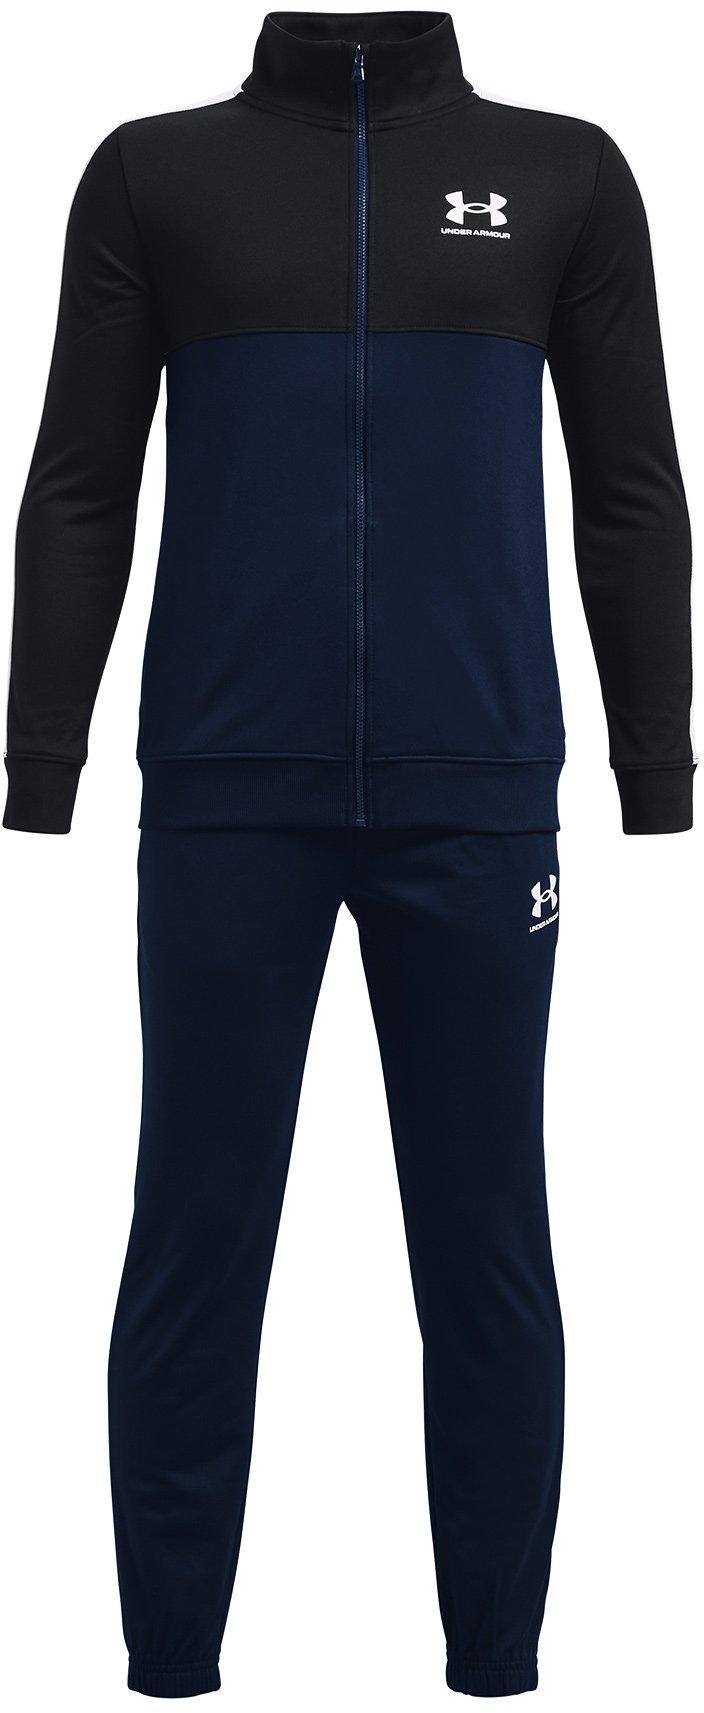 Under Armour CB Knit Track Suit-NVY S